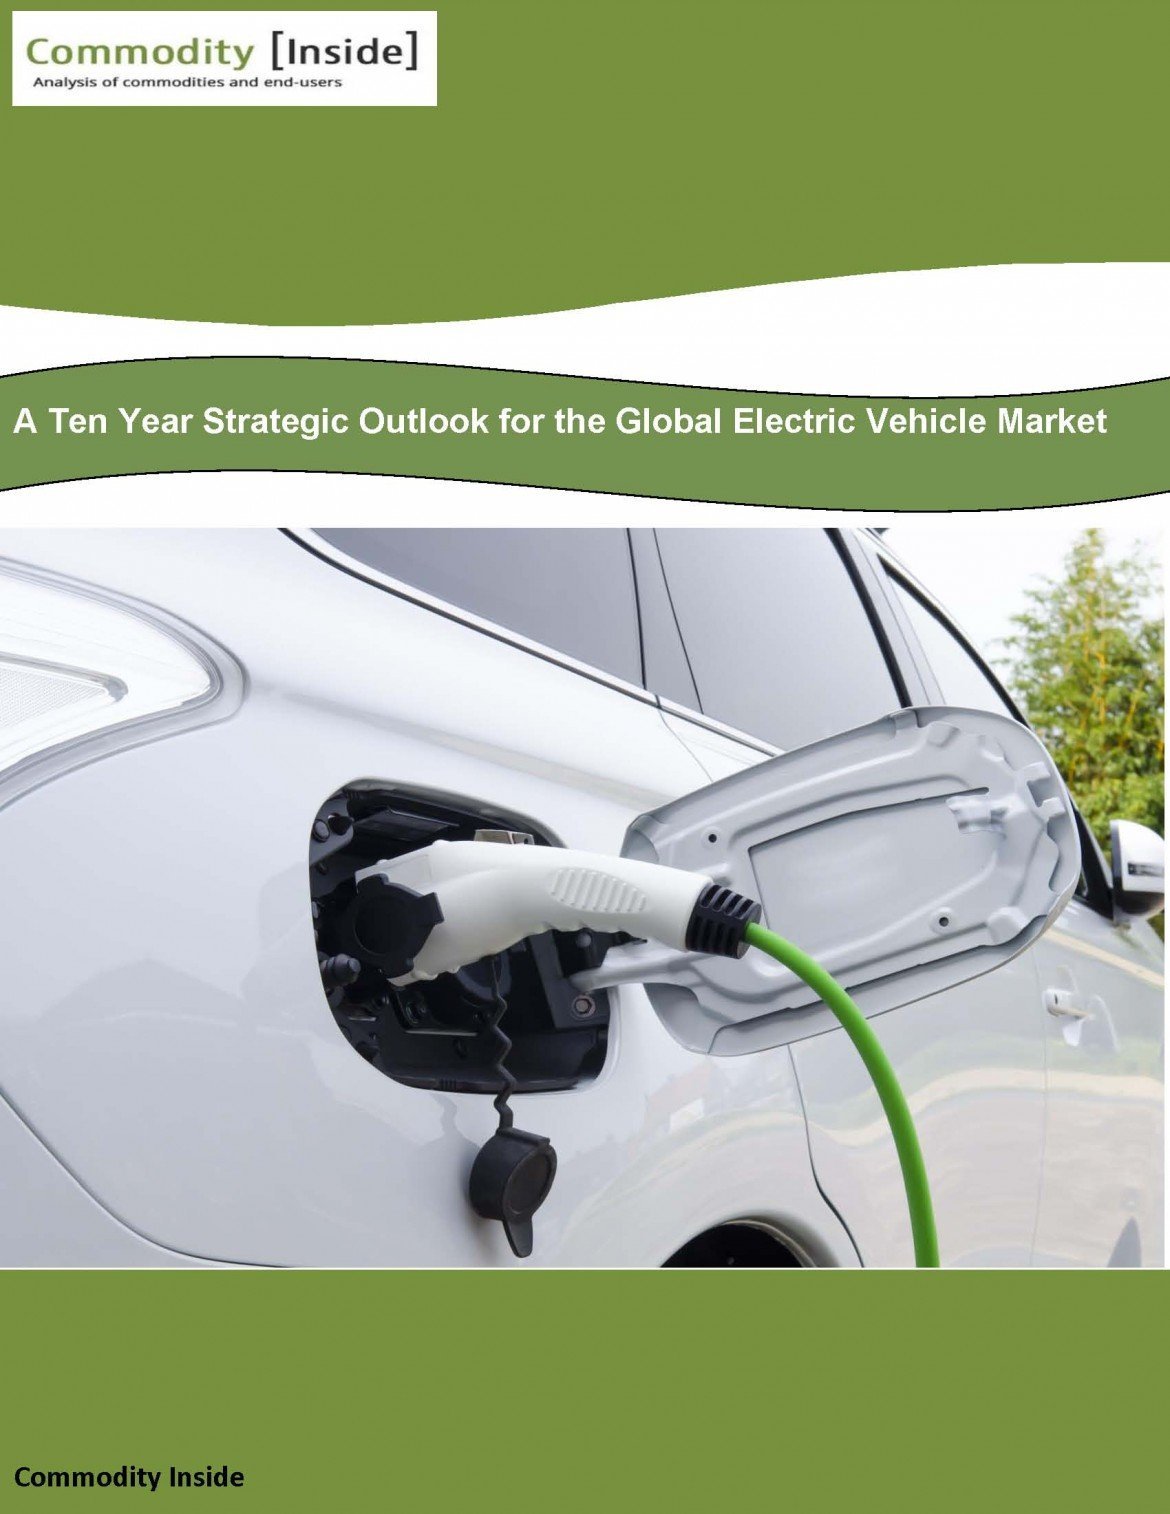 A Ten Year Strategic Outlook for the Global Electric Vehicle Market